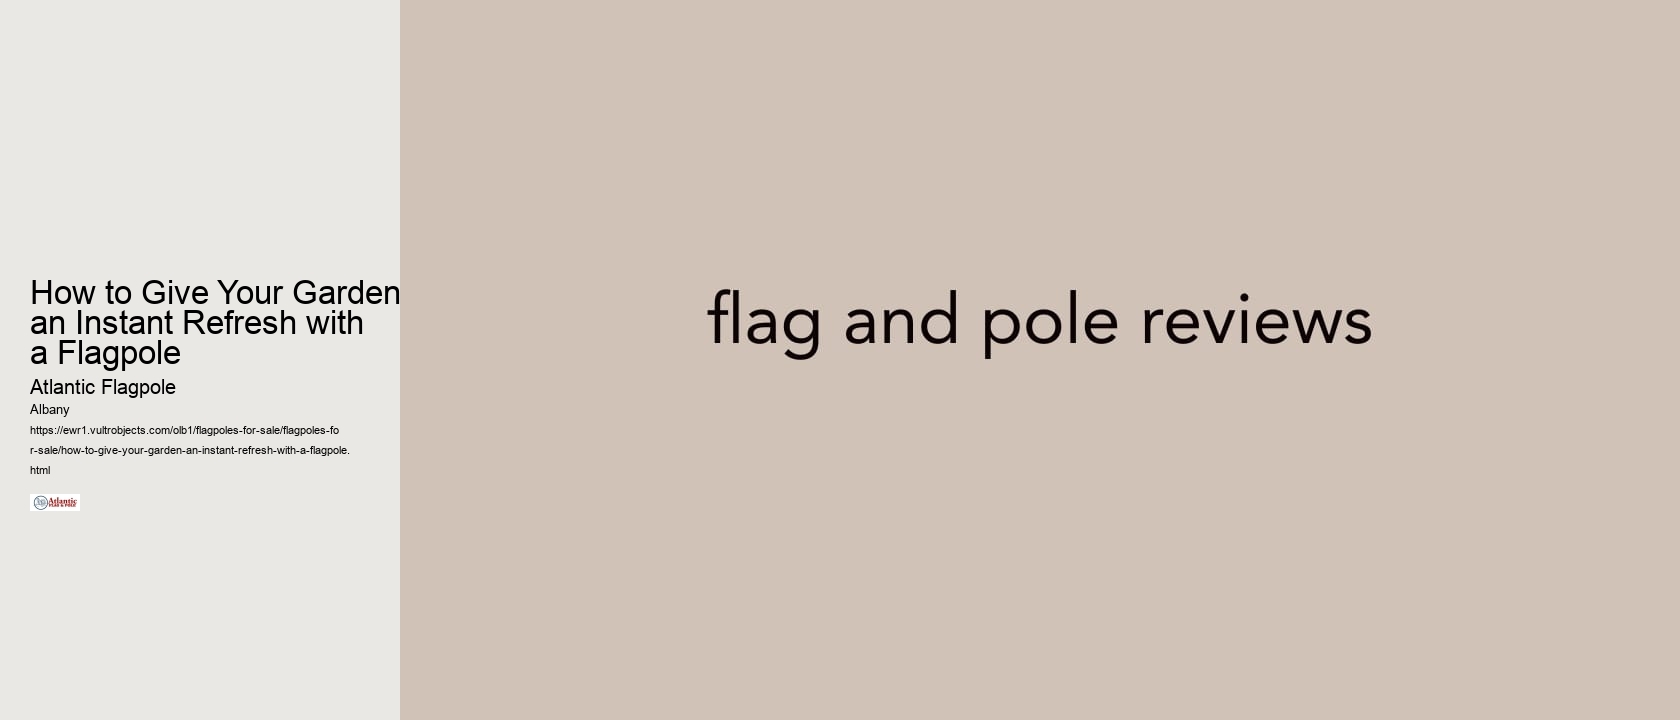 How to Give Your Garden an Instant Refresh with a Flagpole